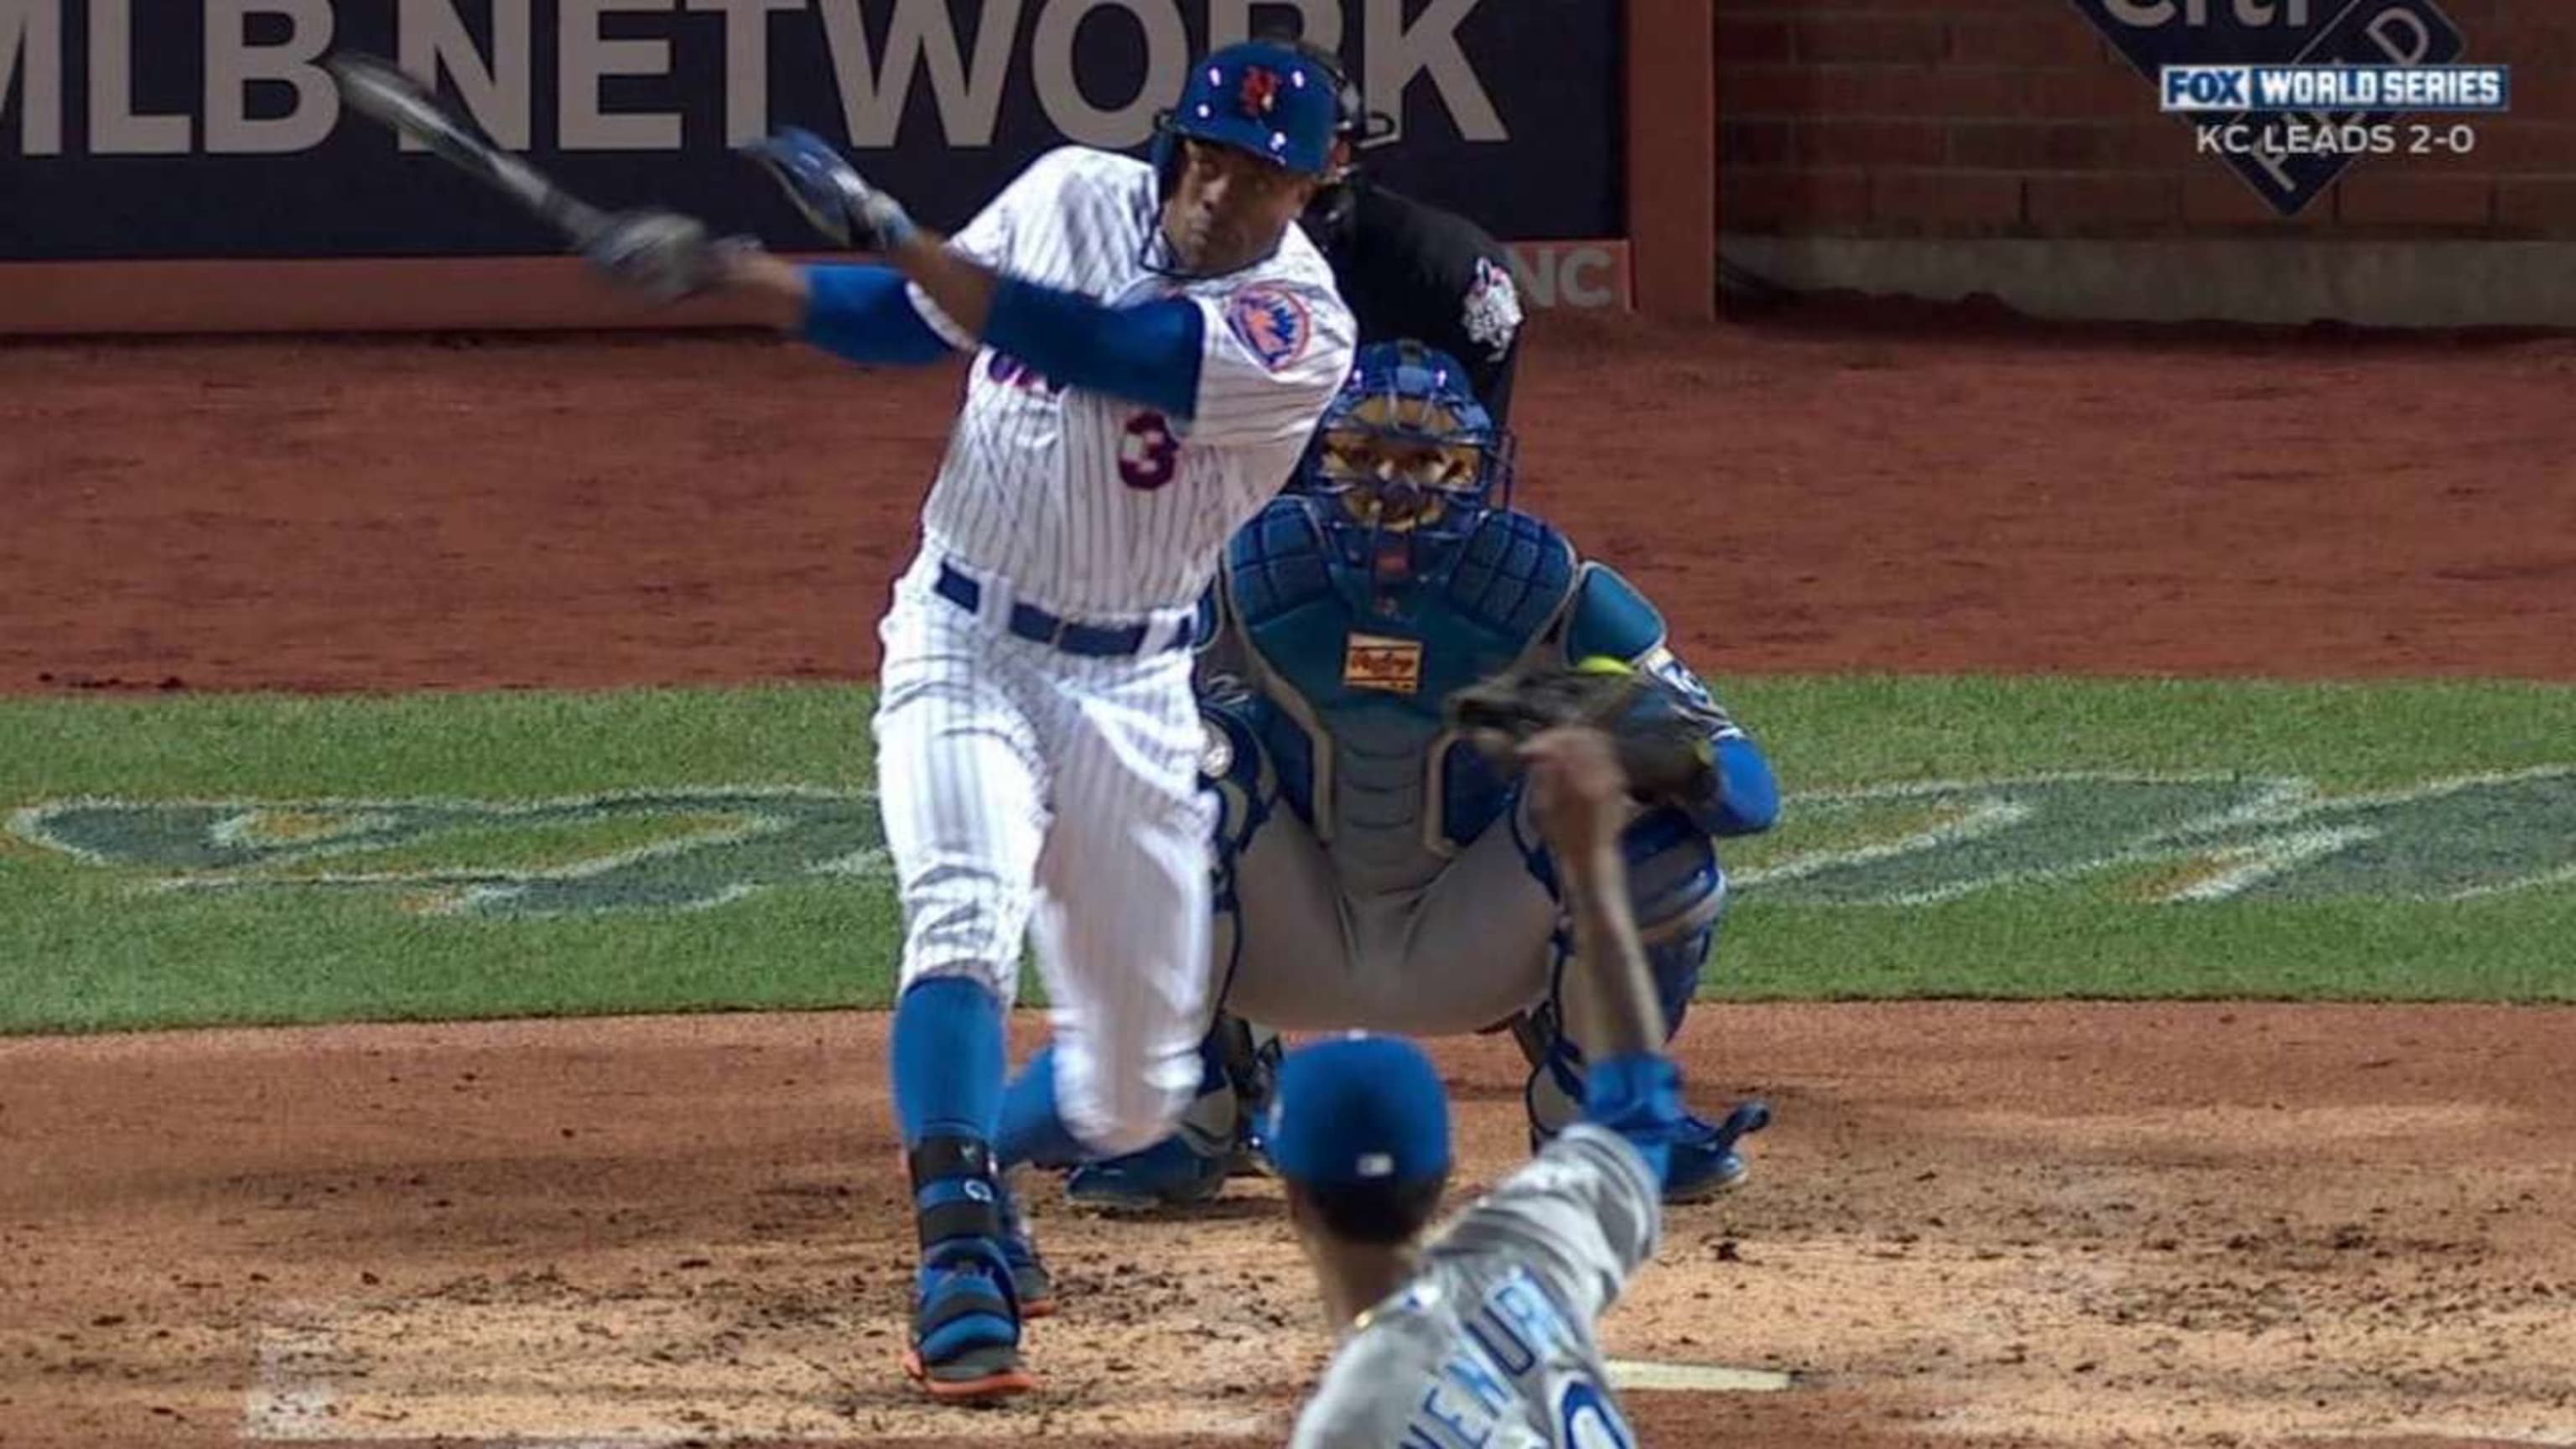 Mets roll in Game 3, cut World Series deficit to 2-1 - The Boston